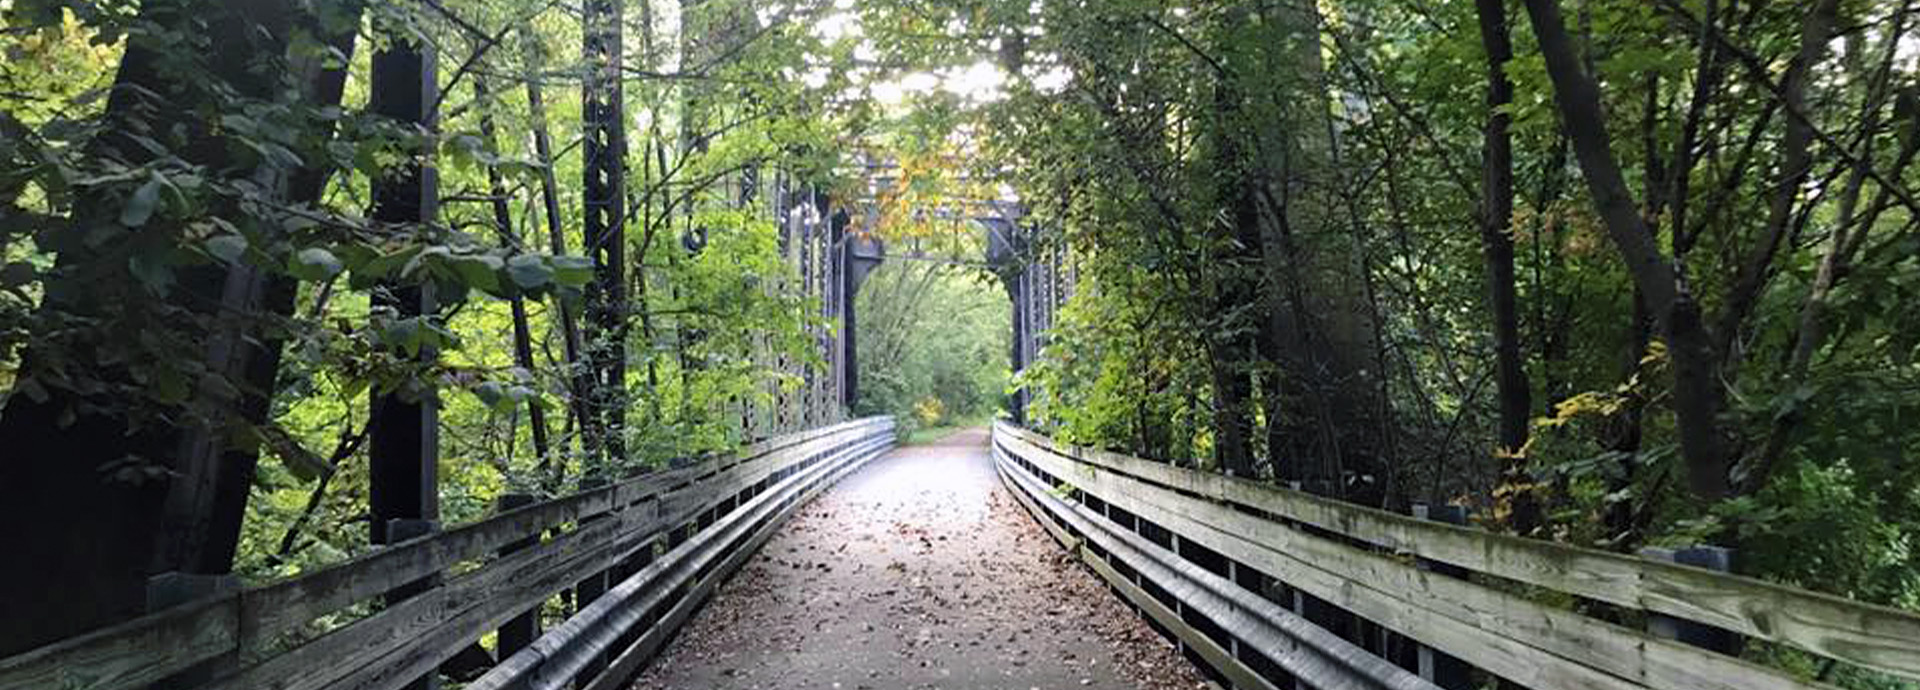 Slideshow Image - An old train bridge on the B&O trail surrounded by lush trees